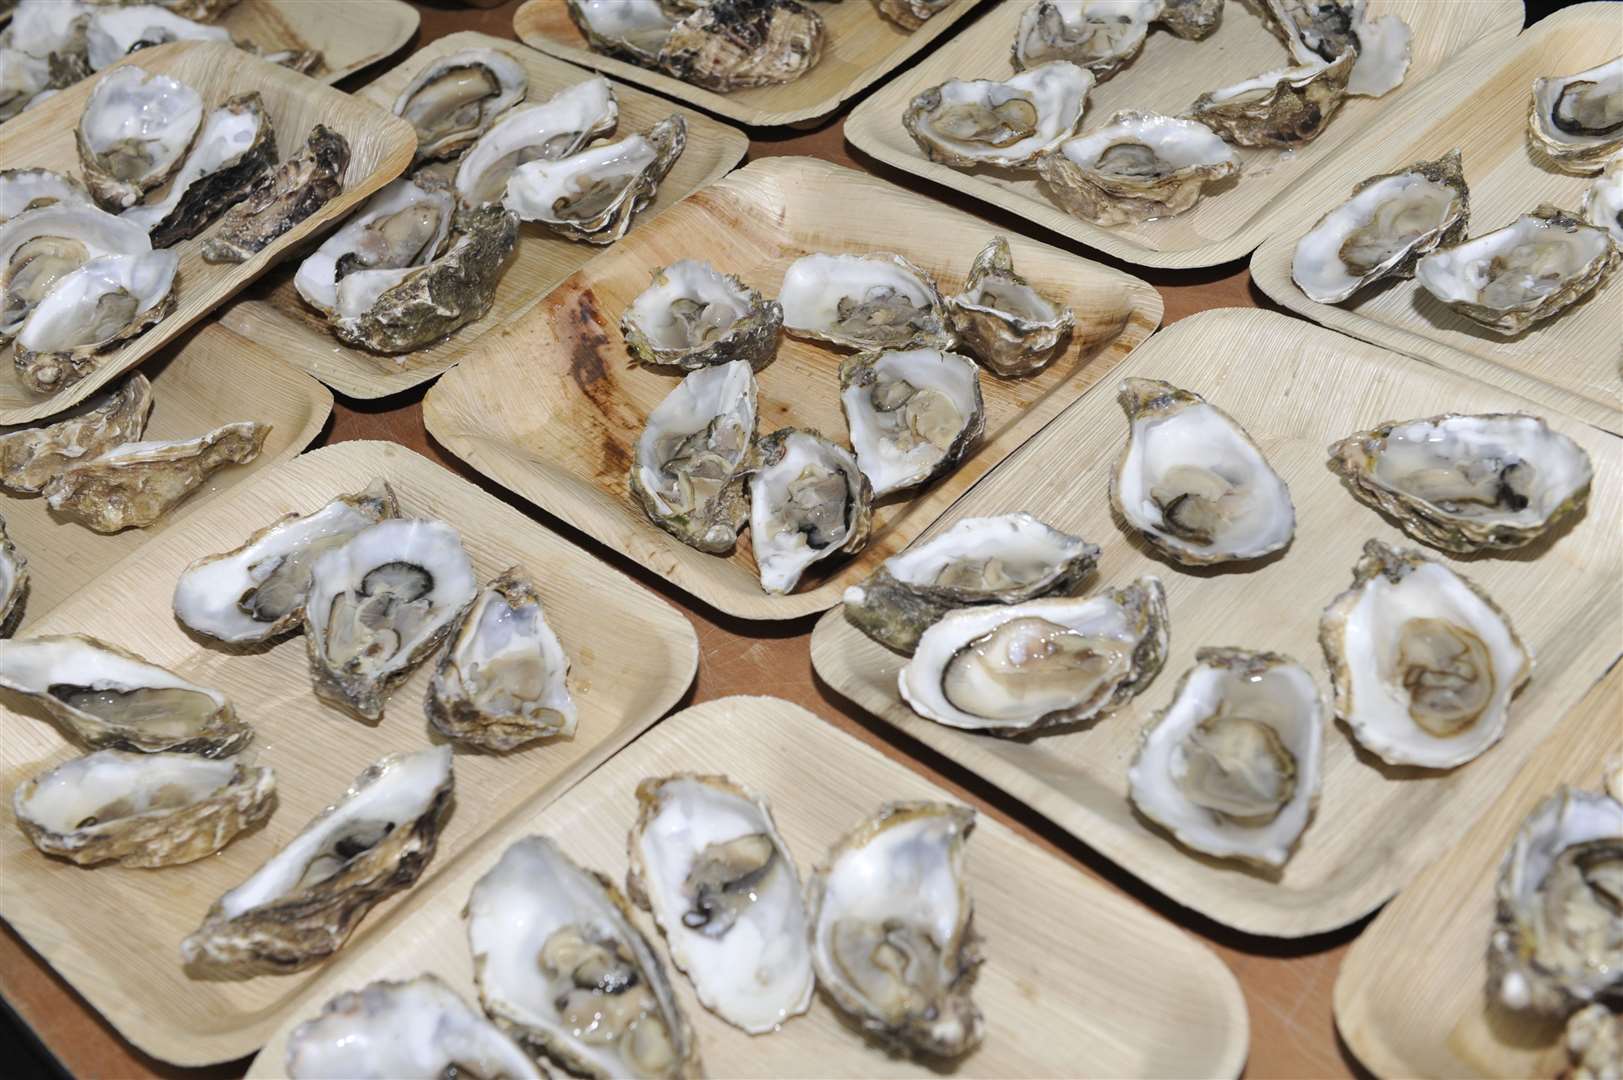 At least 100 people reportedly fell ill after eating oysters